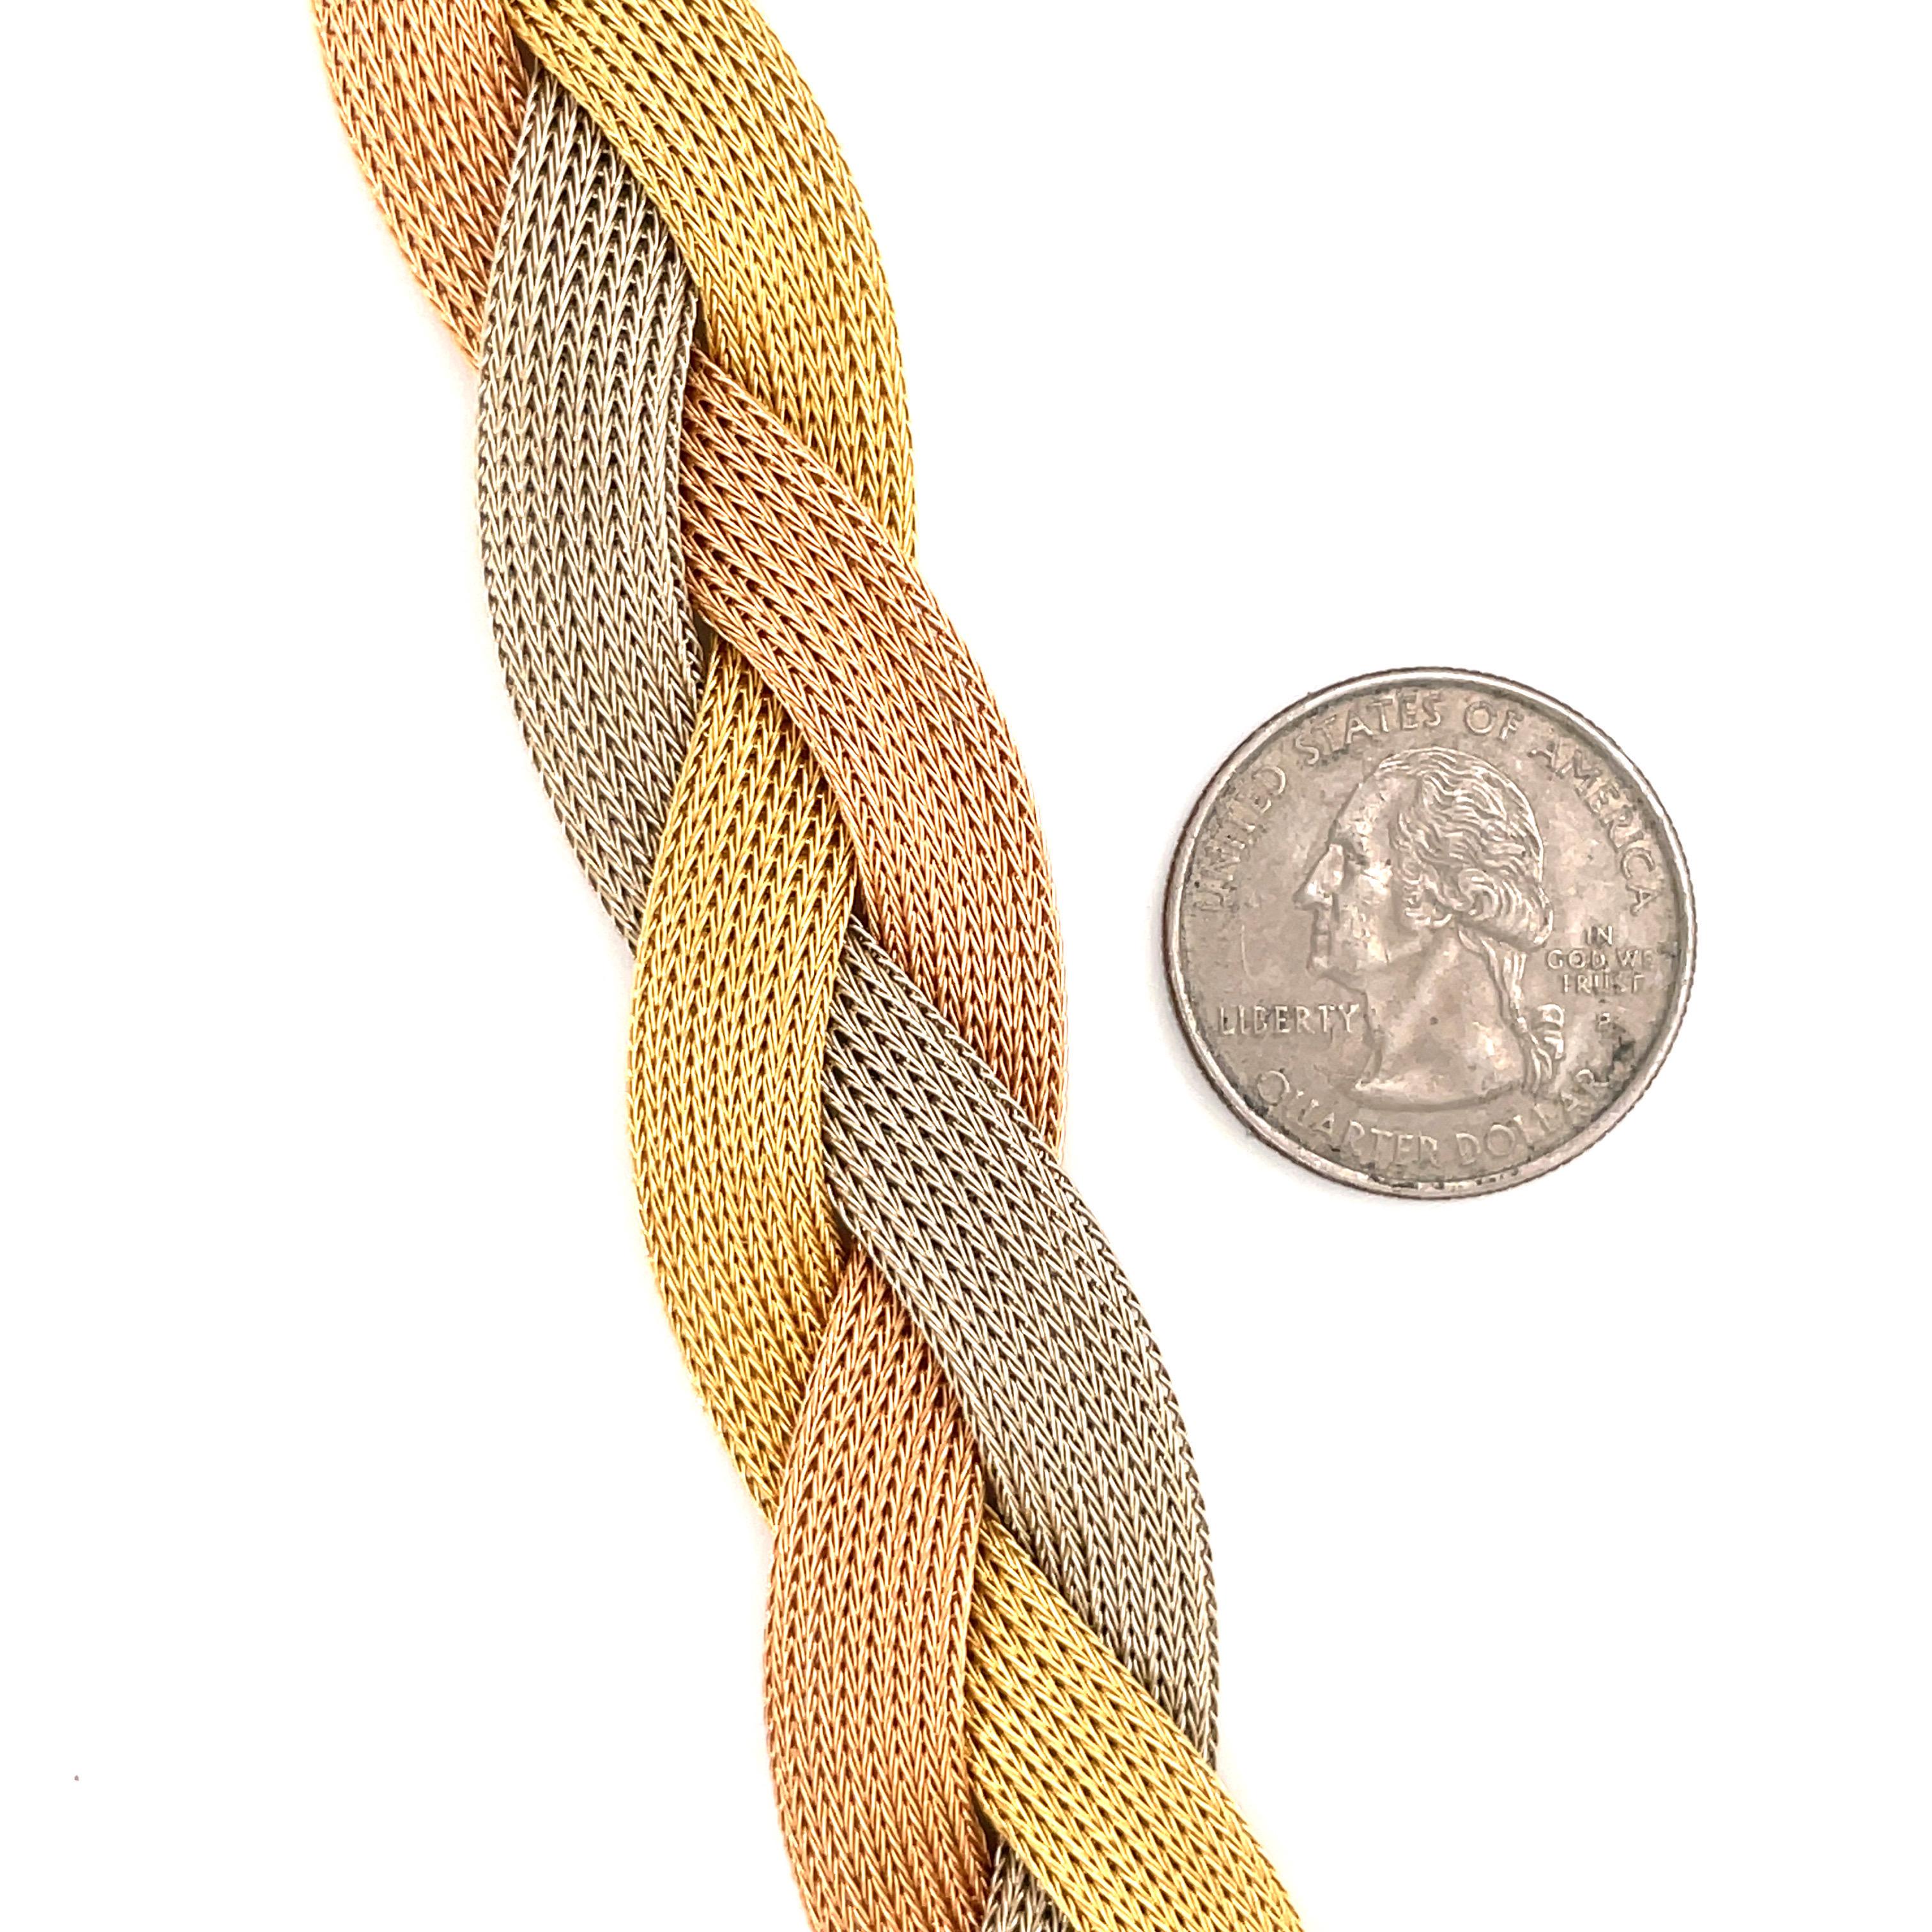 Wide Woven Braided Bracelet 18 Karat Yellow White & Rose Gold 45.5 Grams In Excellent Condition For Sale In New York, NY